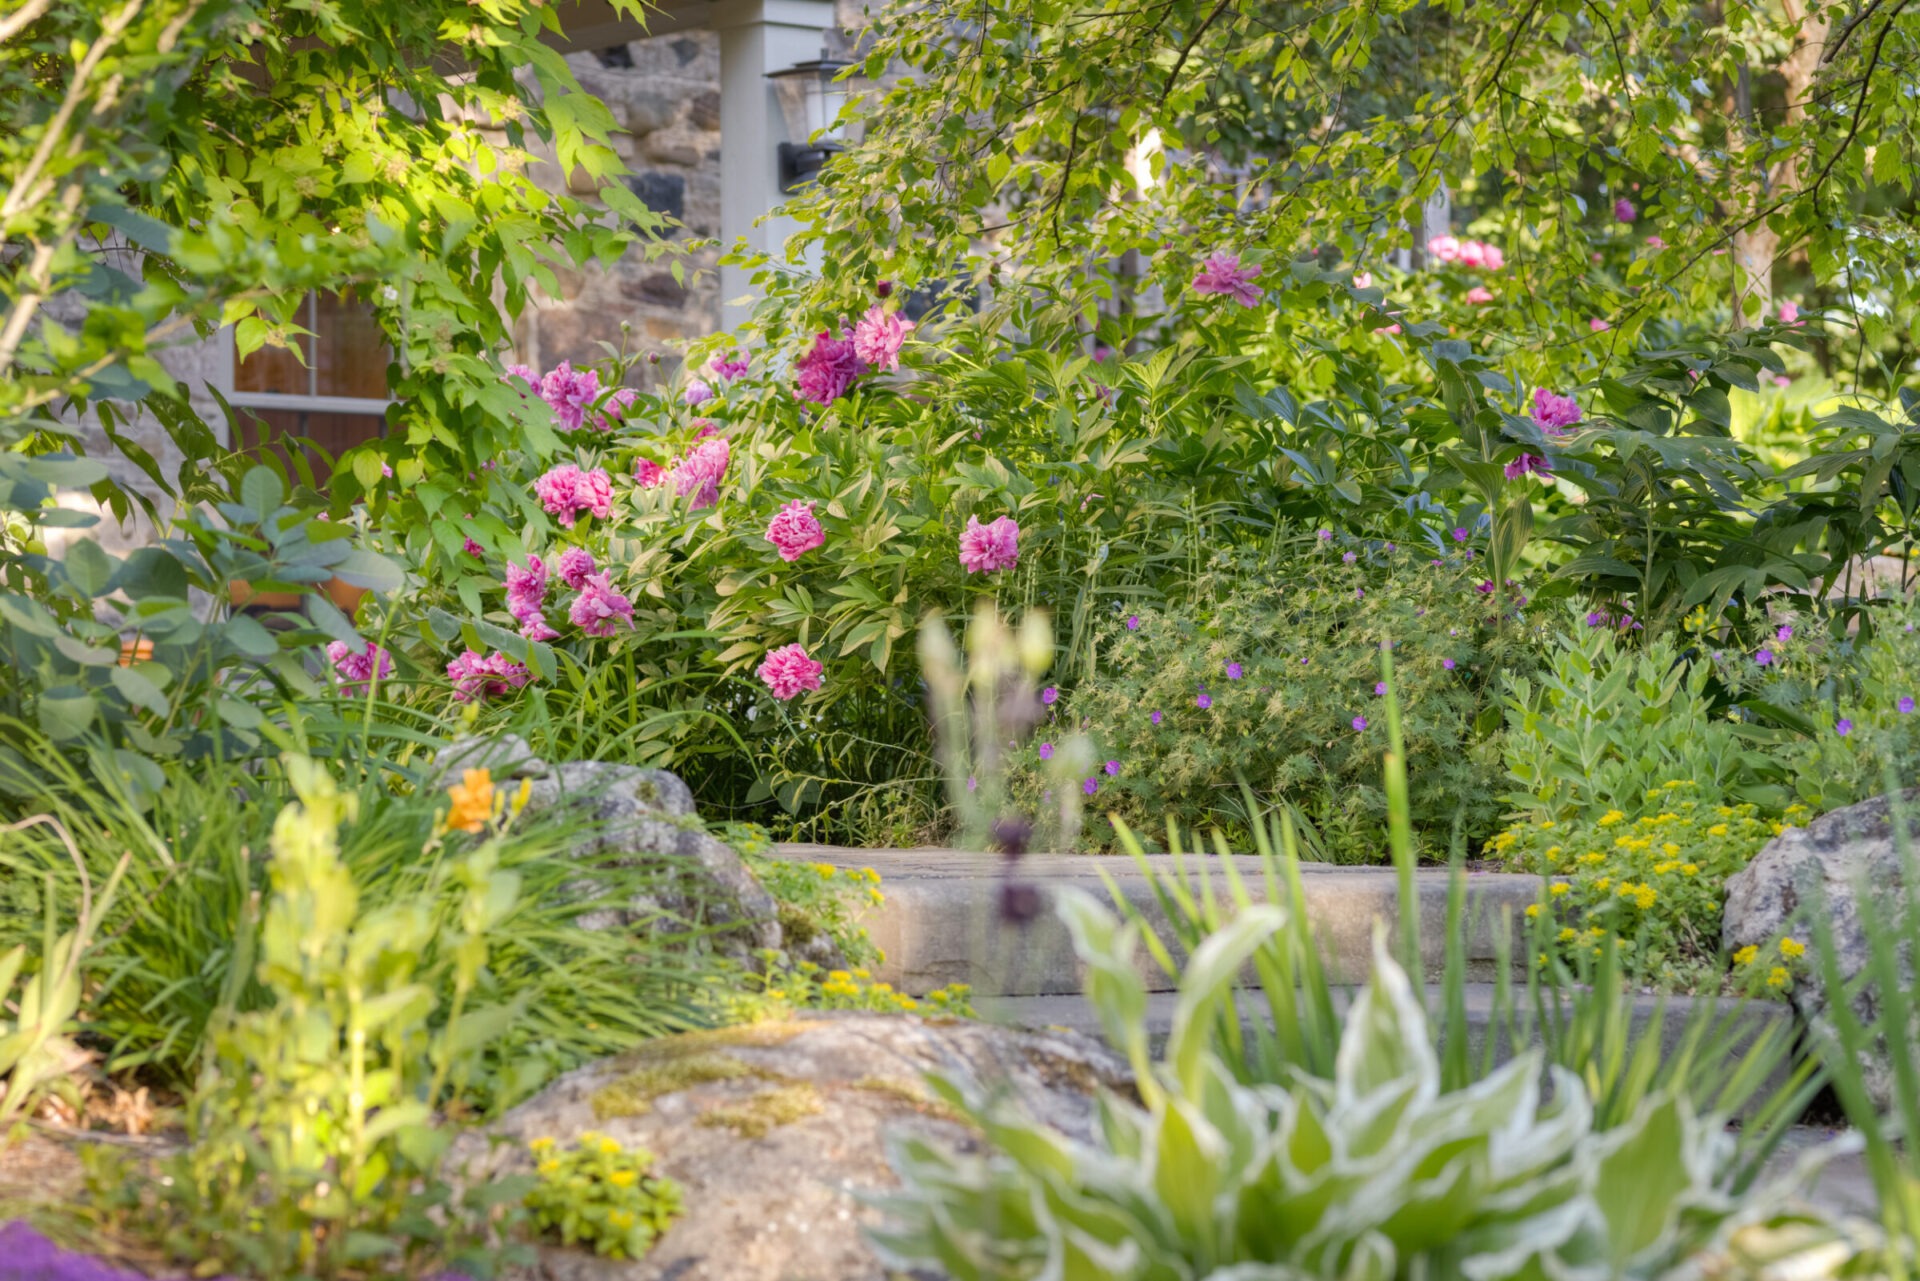 A tranquil garden setting with vibrant pink flowers, lush green foliage, and scattered rocks, hinting at a stonewall and building in the background.